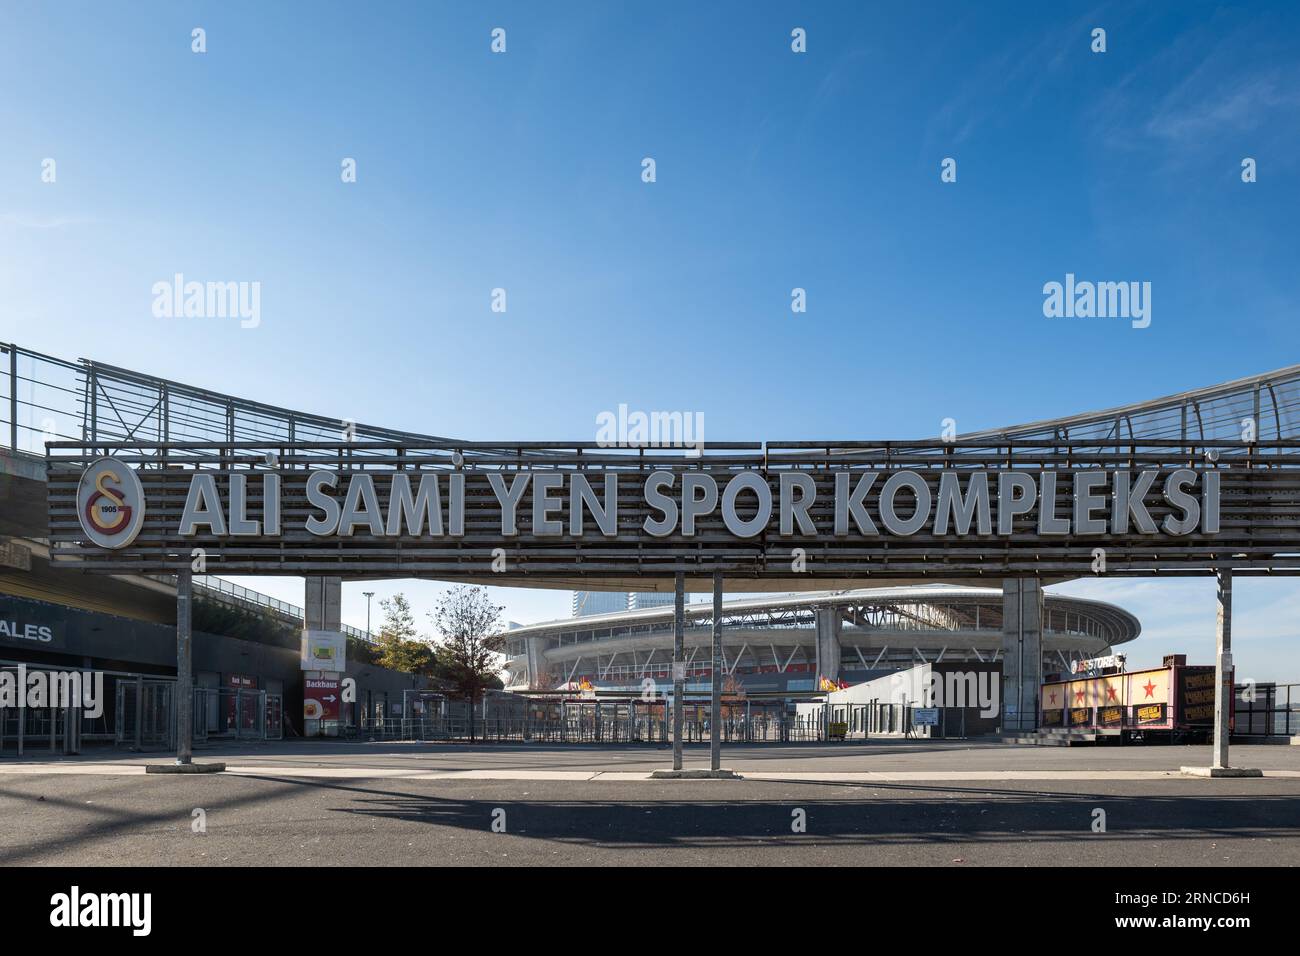 Istanbul, Turkey - 11.14.2021: The home stadium of Galatasaray SK, Ali Sami Yen Spor Kompleksi with a sign in Turkish. It is branded as Rams Park for sponsorship reasons Stock Photo